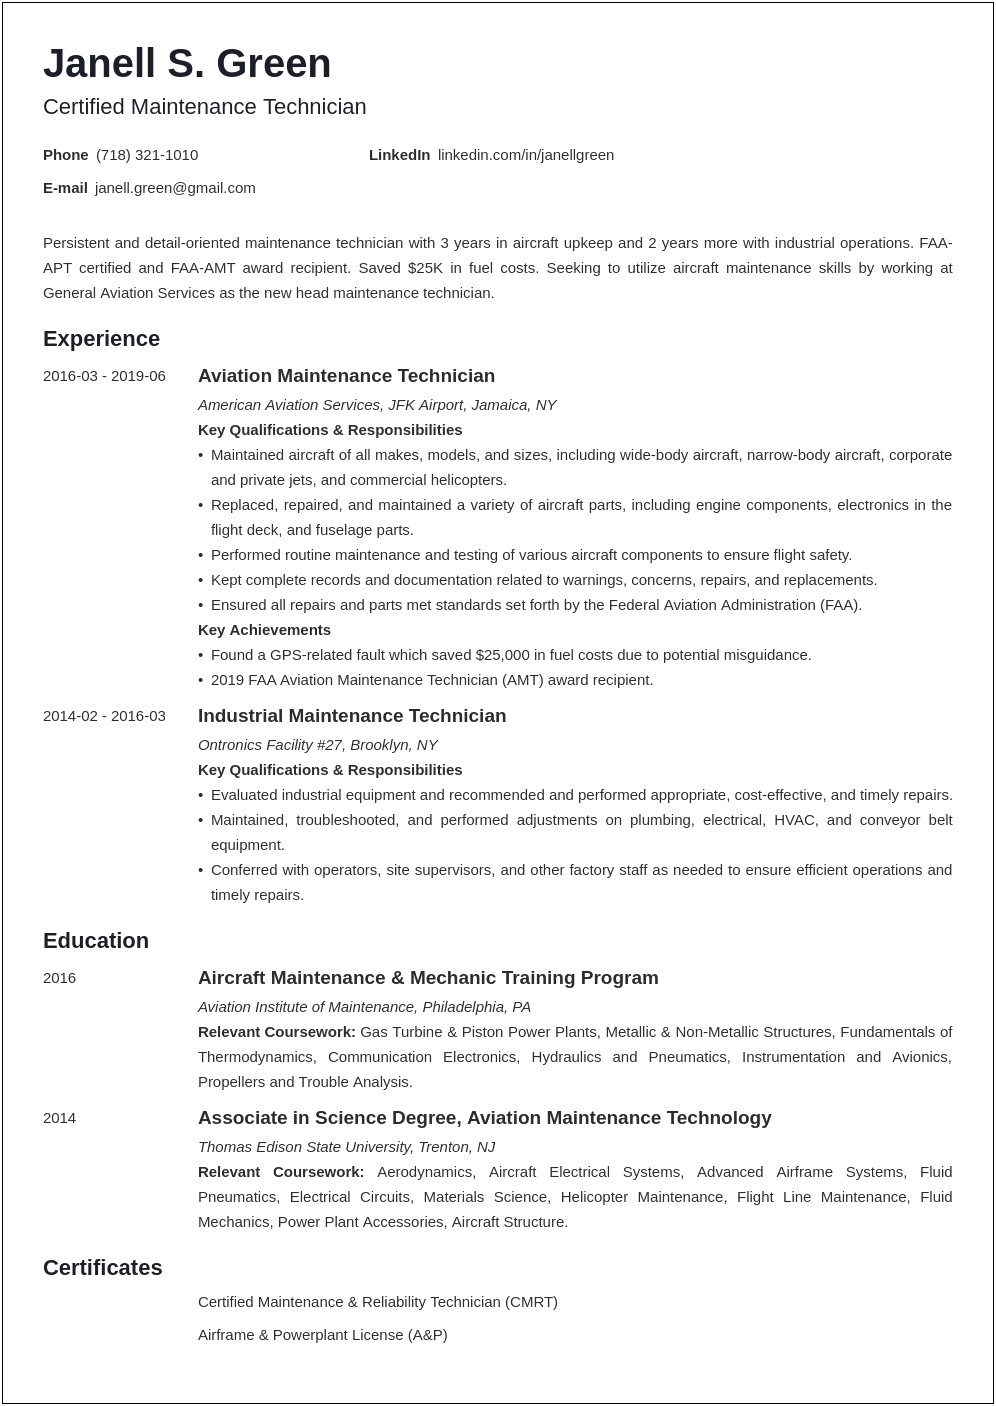 Resume Objective For Manufacturing Technician